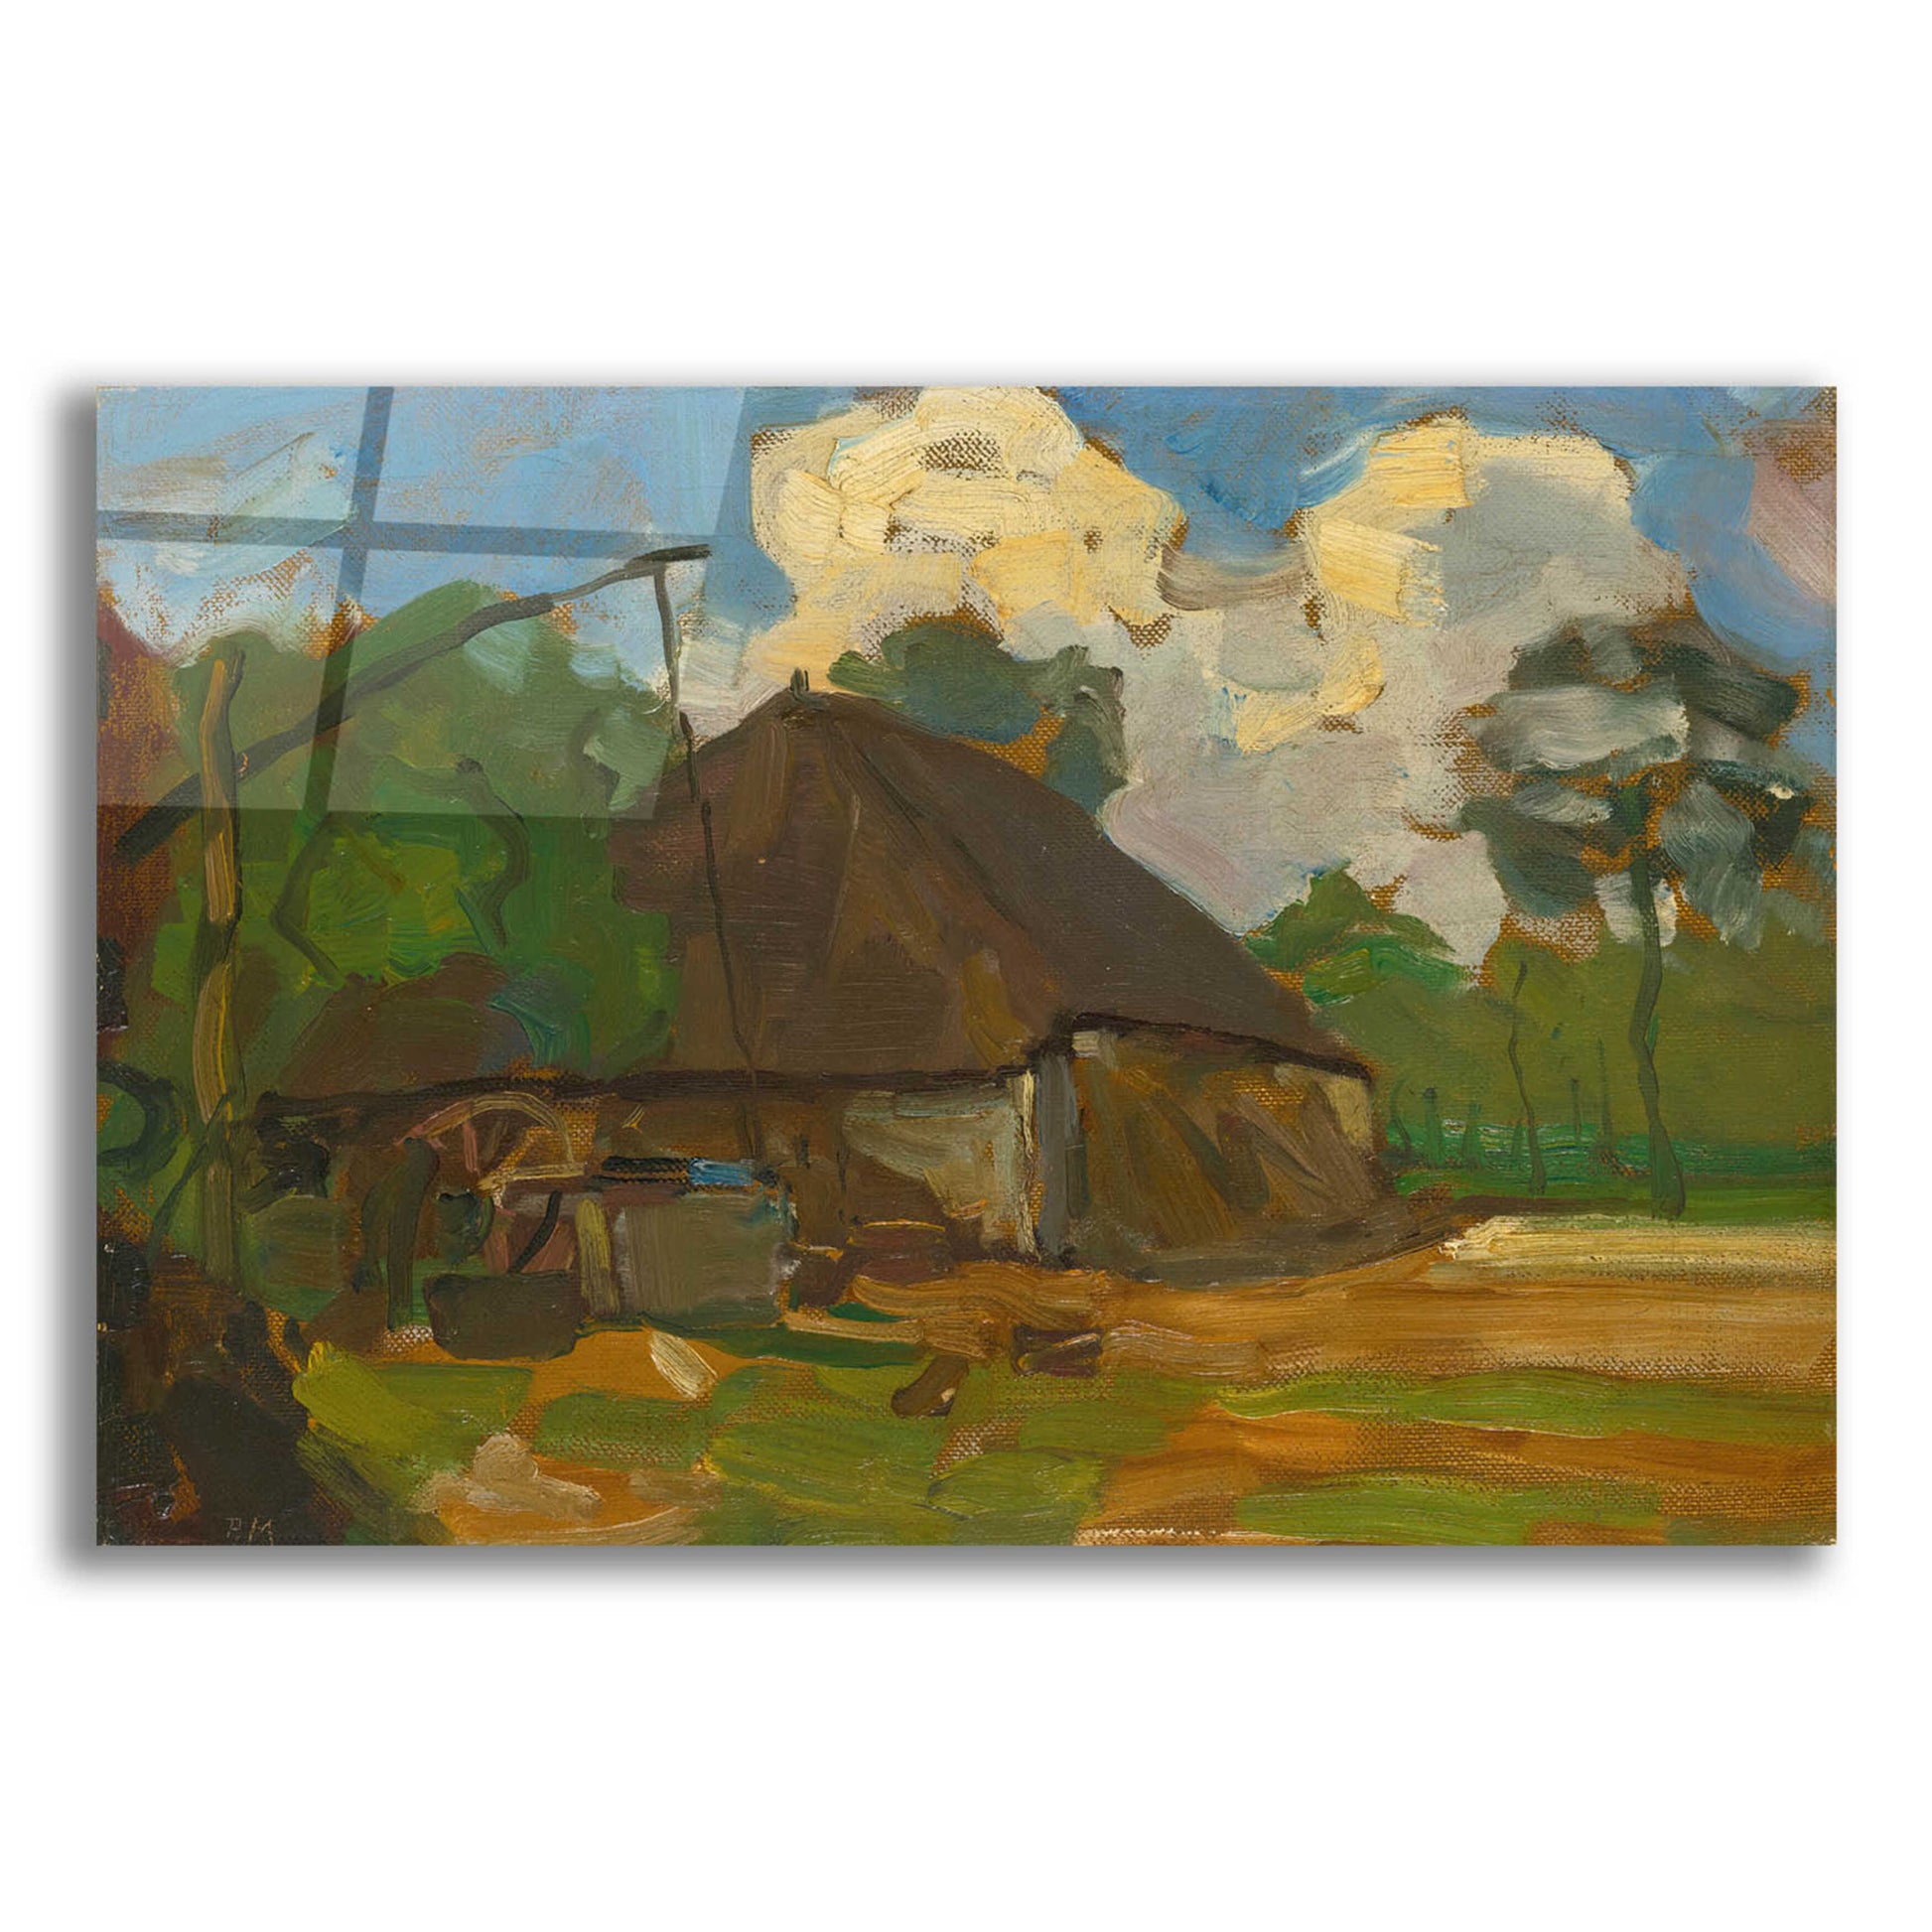 Epic Art 'Farm Building With Well In Daylight, 1907' by Piet Mondrian, Acrylic Glass Wall Art,16x12